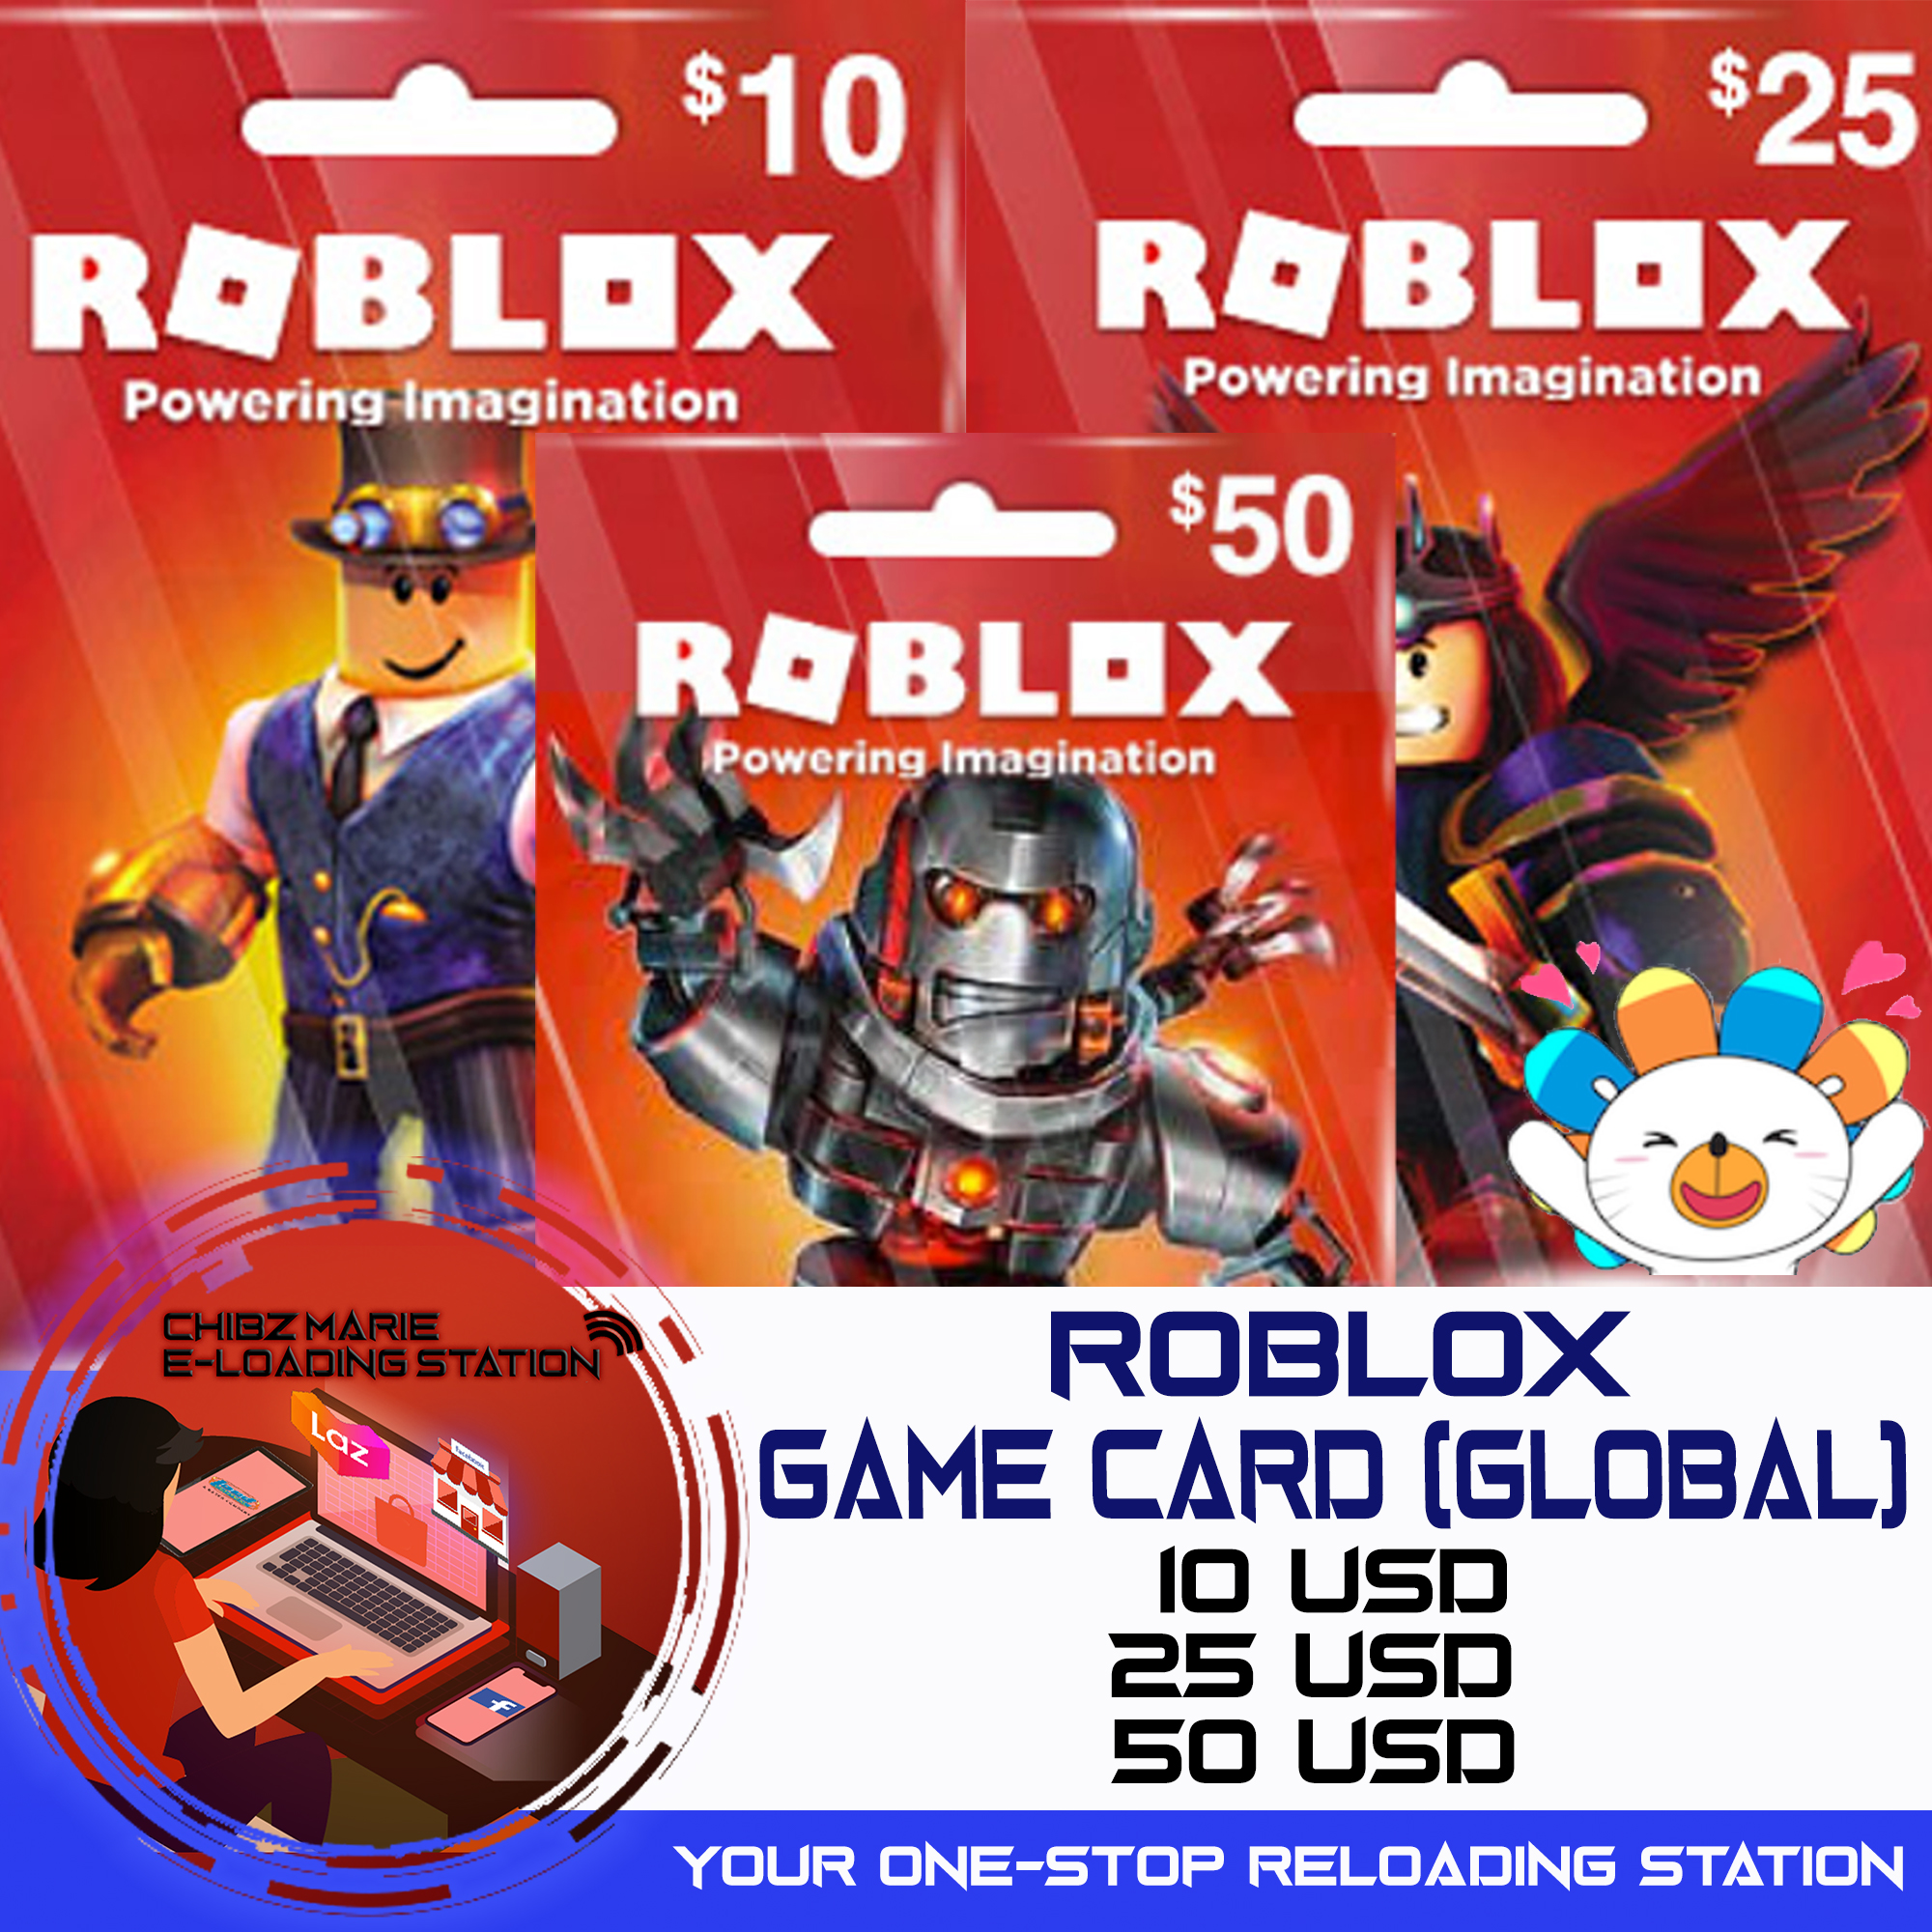 Robux Roblox Gift Card Game Card Global Us 10 25 50 Chibzmarie Lazada Ph - where to buy roblox redeem cards in philippines